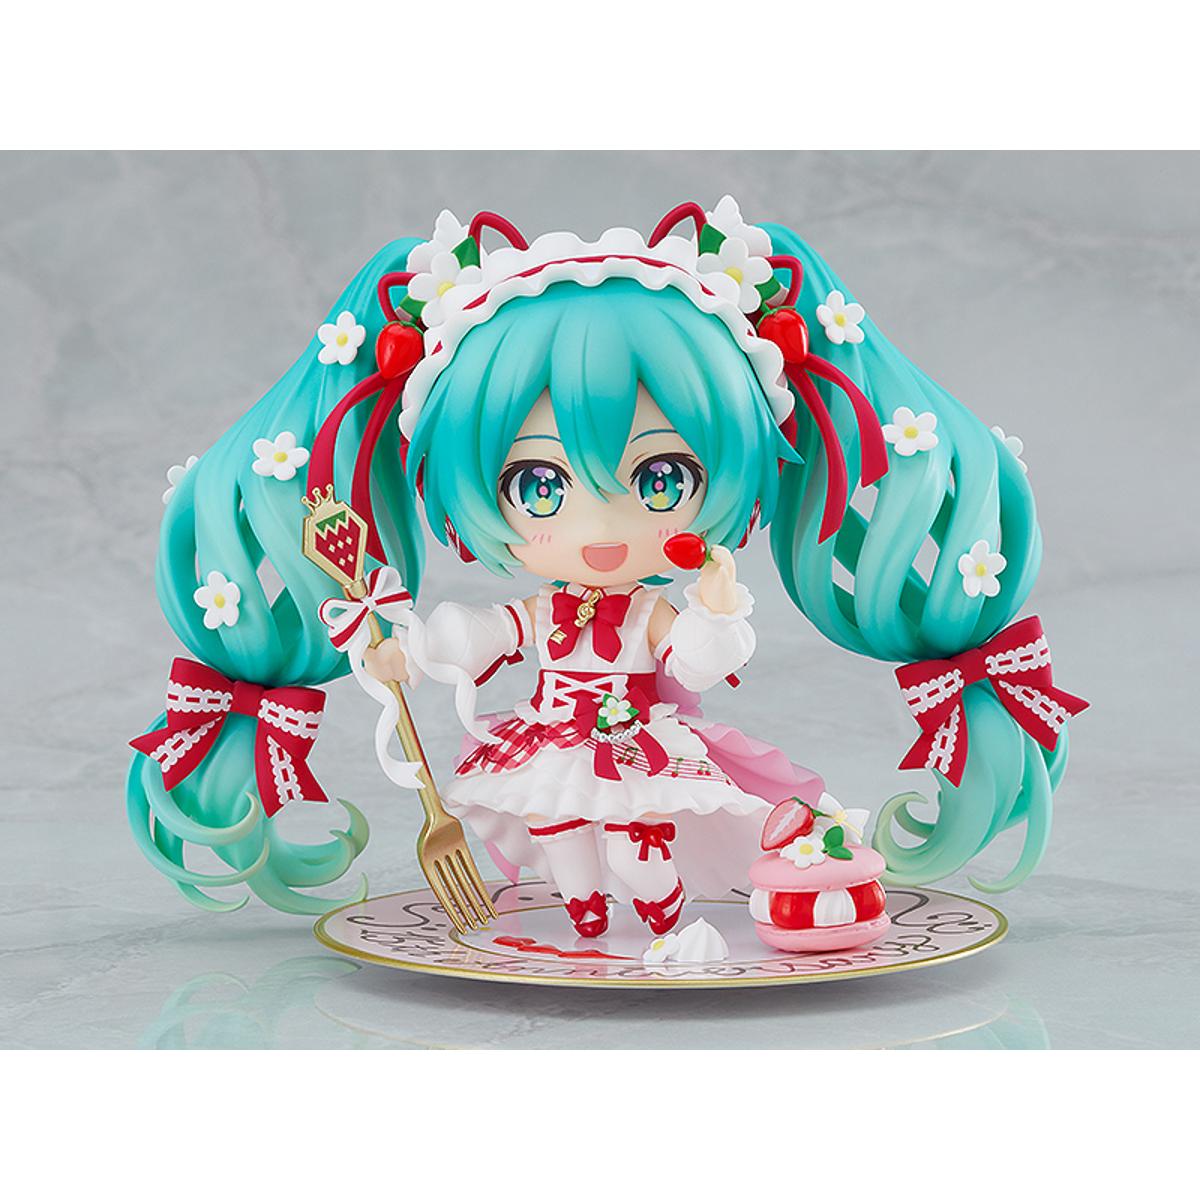 Good Smile Company GSC Hatsune Miku appears in a brand new strawberry motif outfit. The 15th Anniversary Figure Project illustration by En Morikura has been transformed into a Nendoroid! Miku's gorgeous outfit adorned with strawberries and frills and her twintail hairstyle have been faithfully captured in Nendoroid form. 